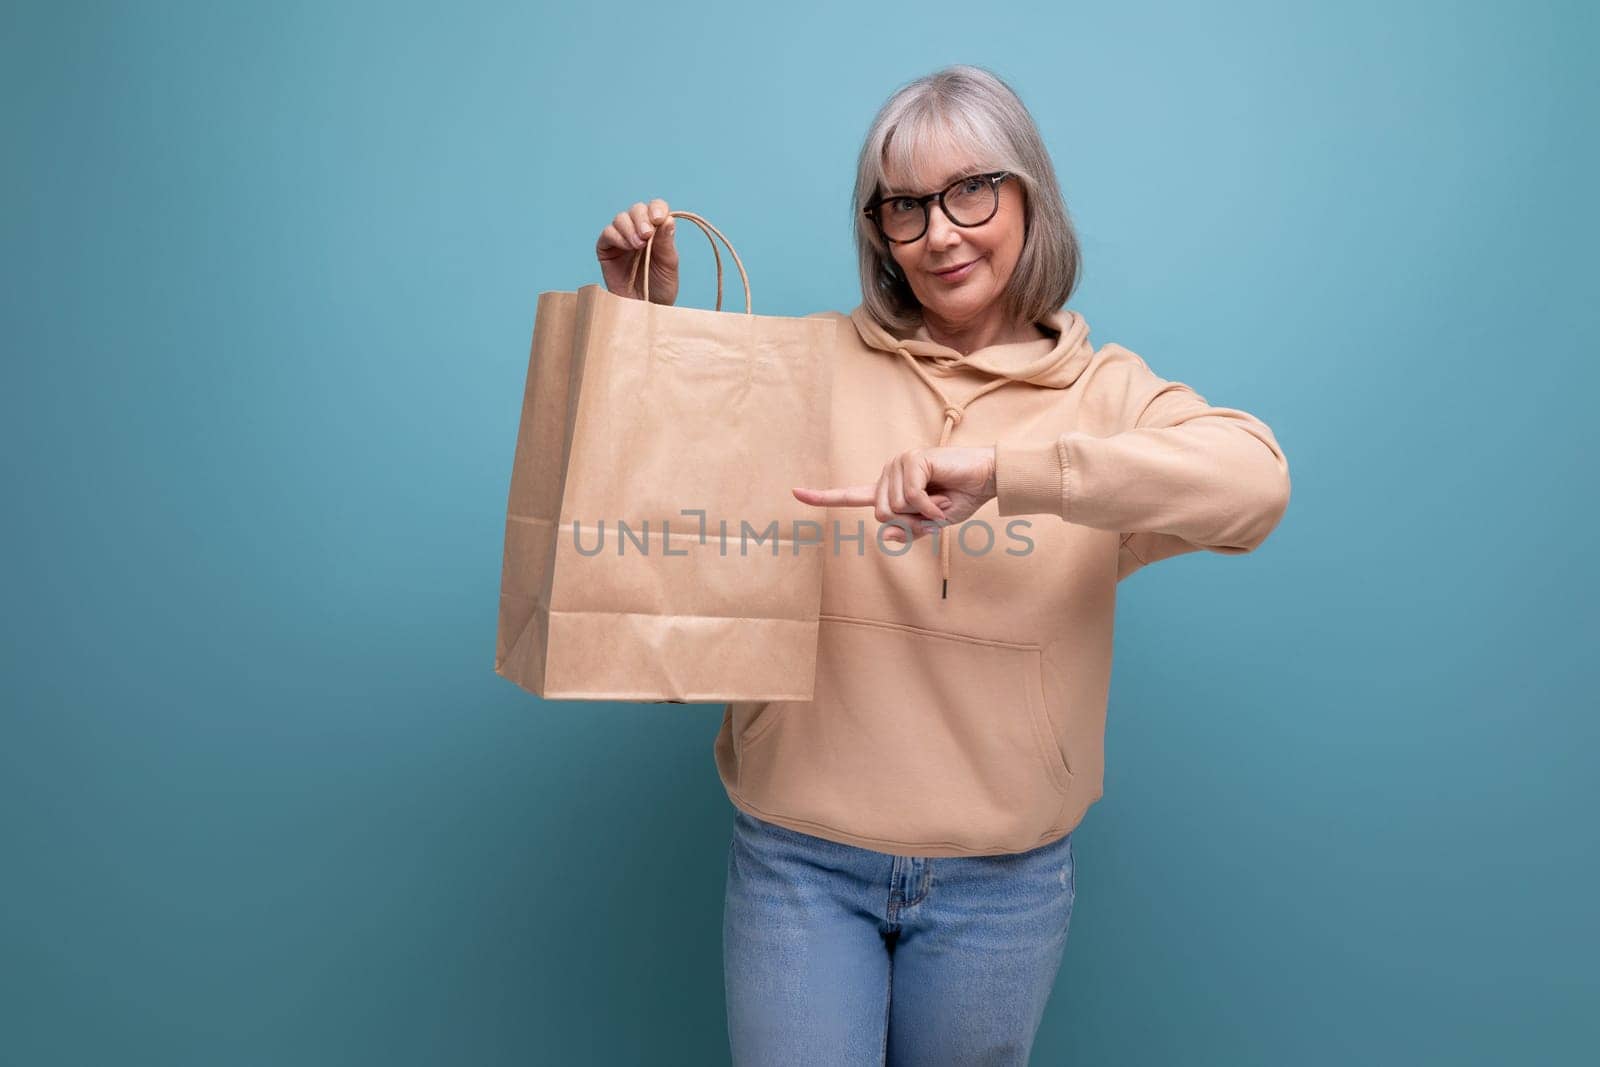 mature 60s business woman with gray hair holding craft shopping bag on studio background with copy space.